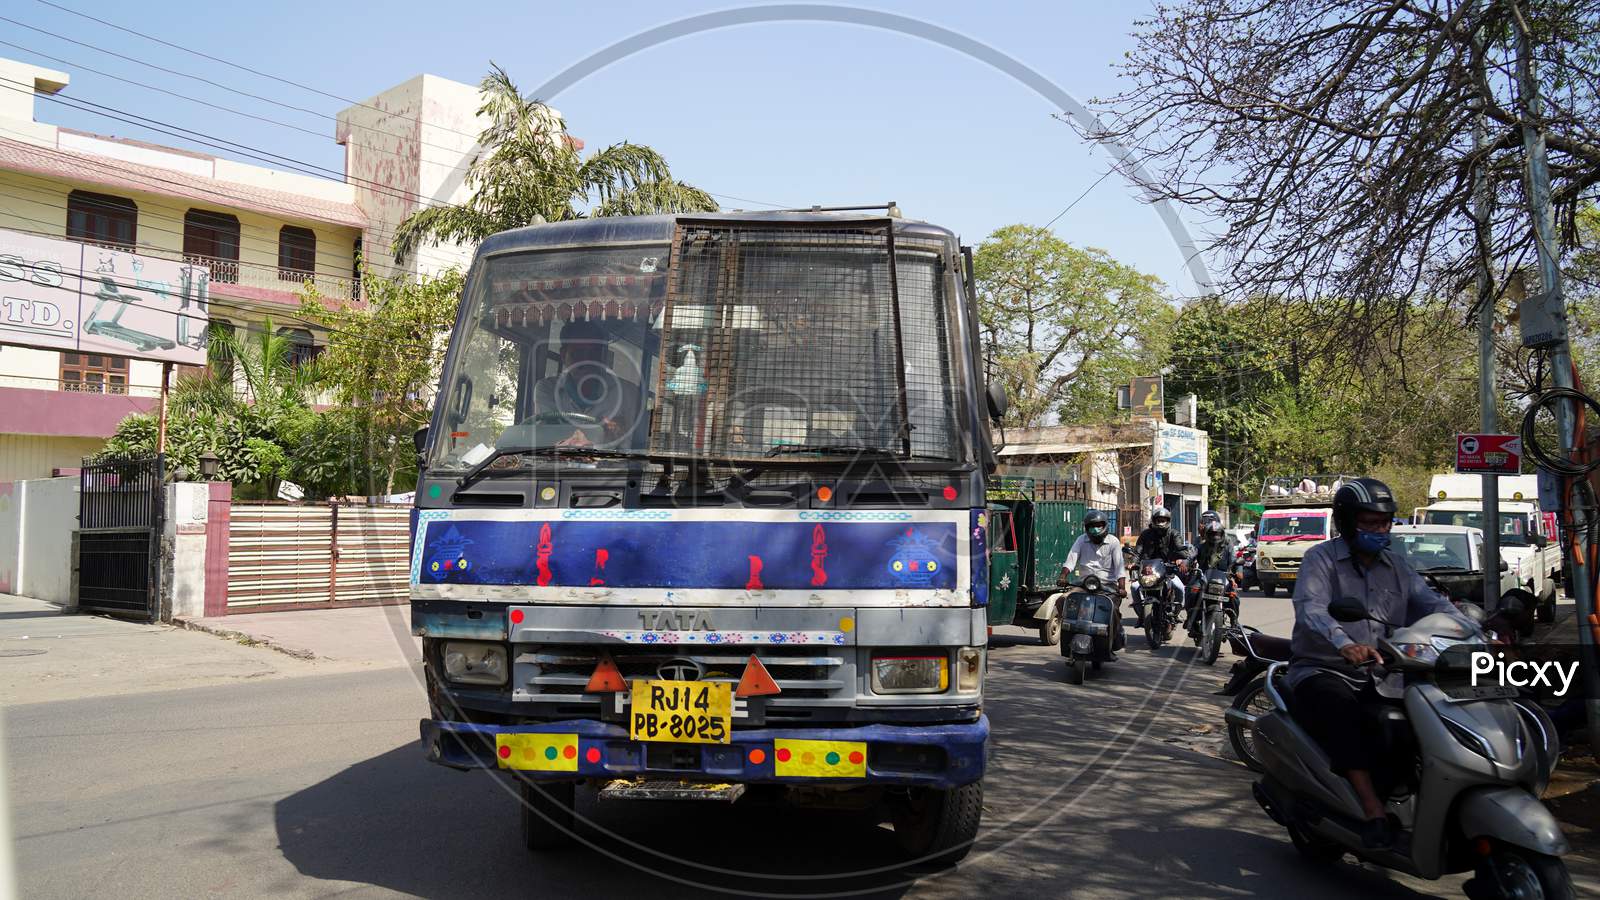 City Space Indian Bus Closeup. Traffic Bus Runs On Road With Motorbike Riders In Background.